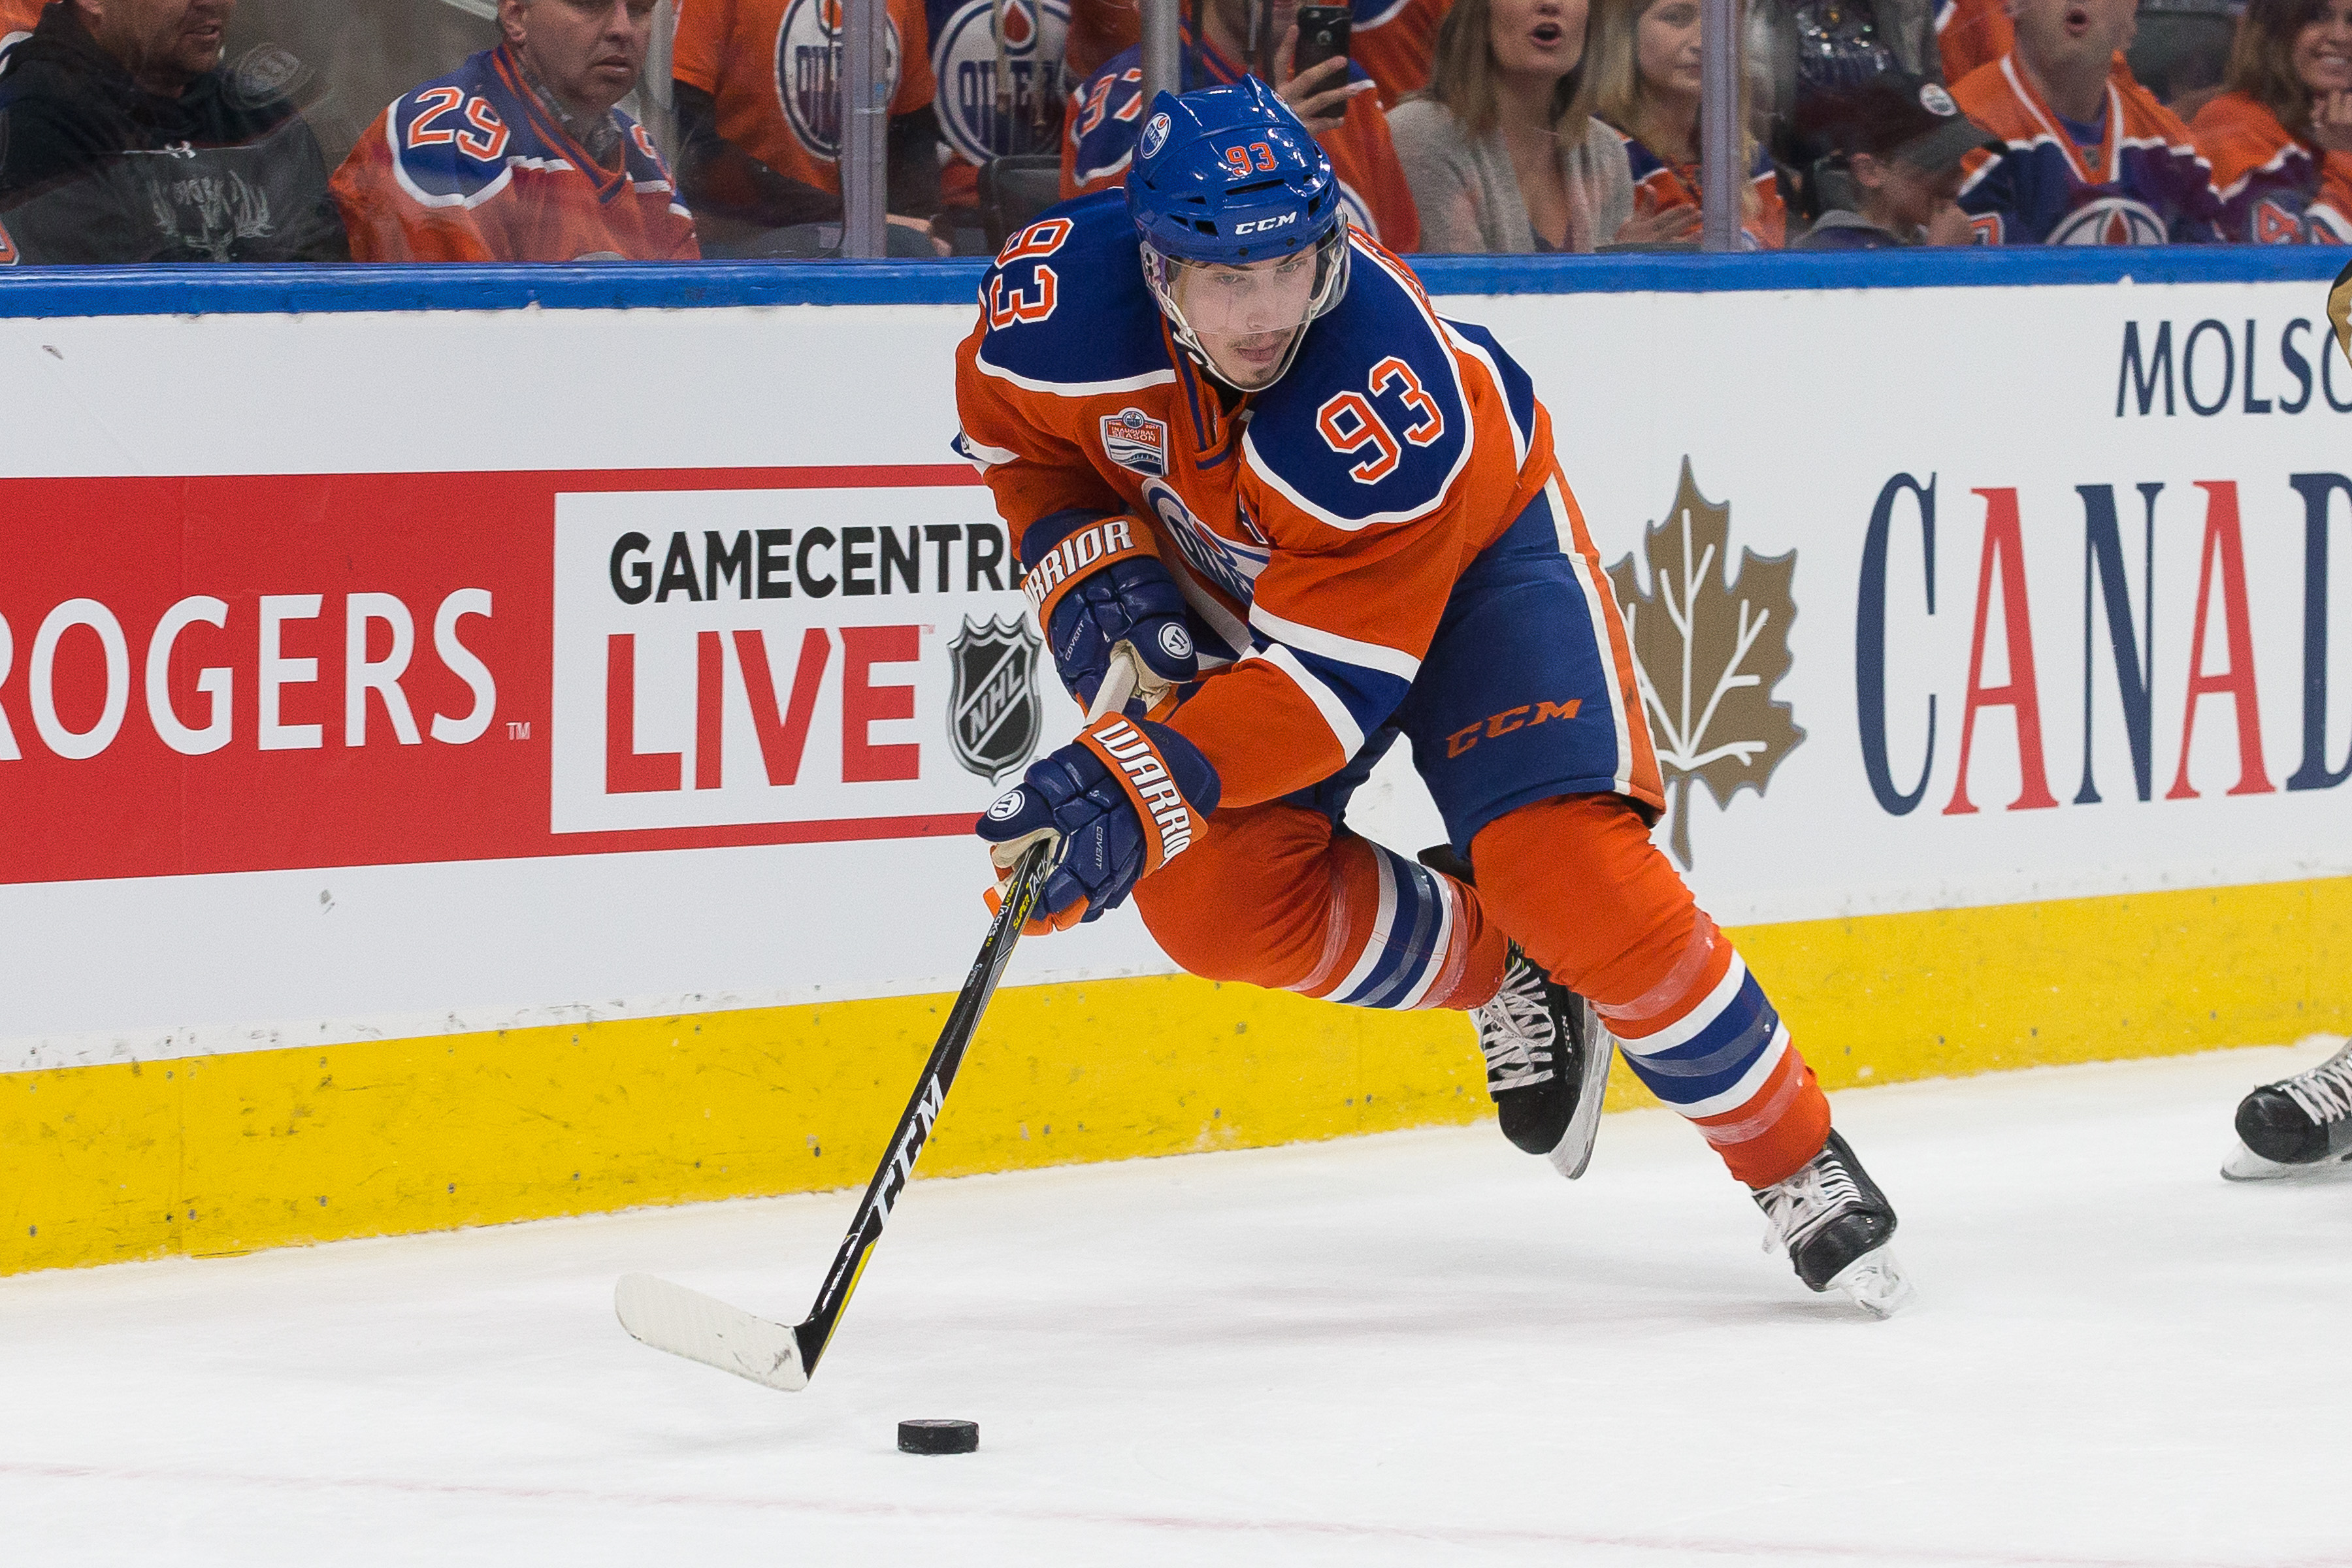 Minnesota Wild: Is a Trade for Ryan Nugent-Hopkins Possible?